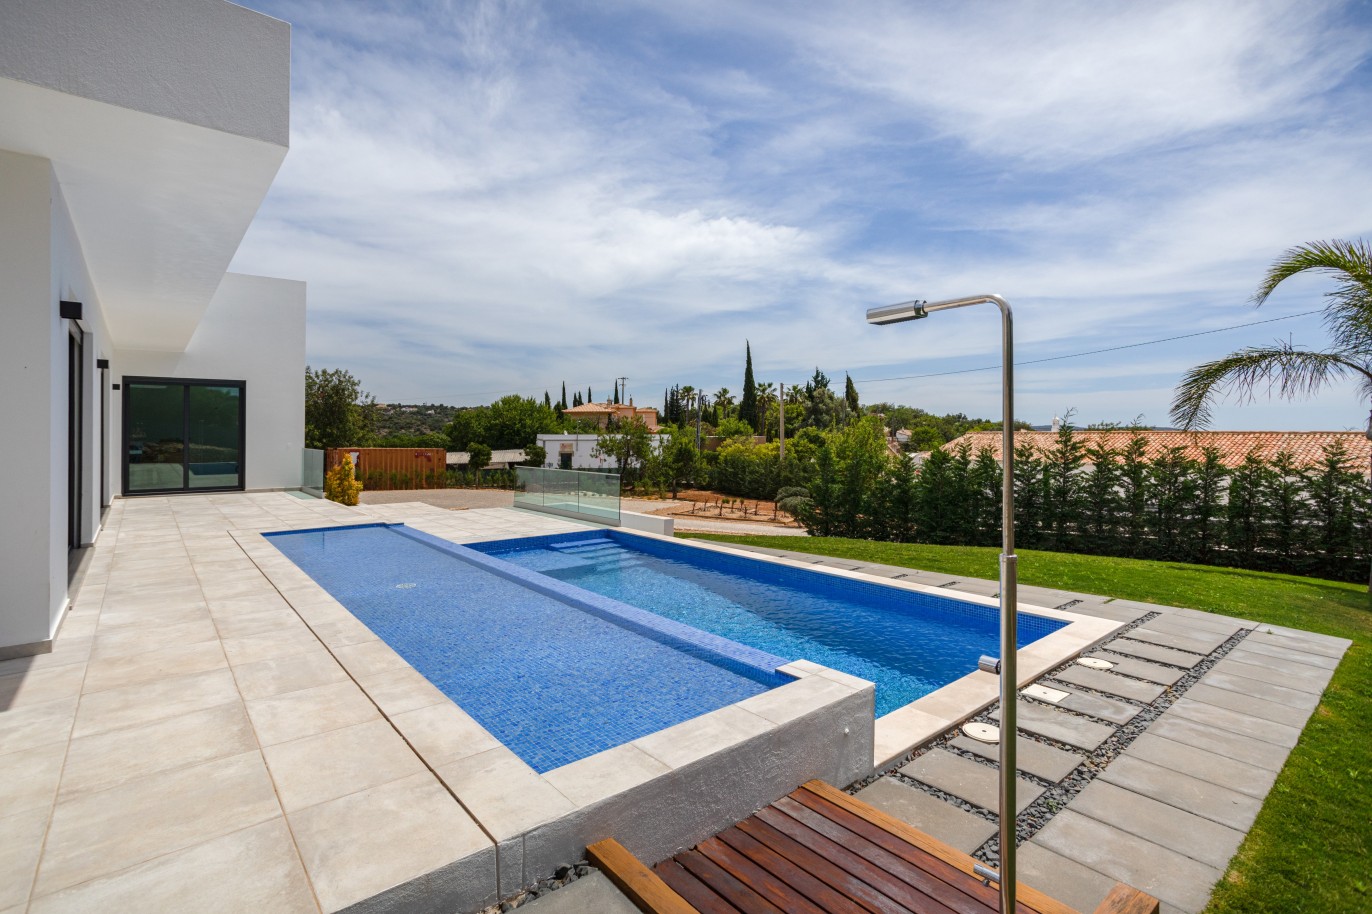 4+1 Bedroom Villa with pool and sea view, for sale in Loulé, Algarve_225772